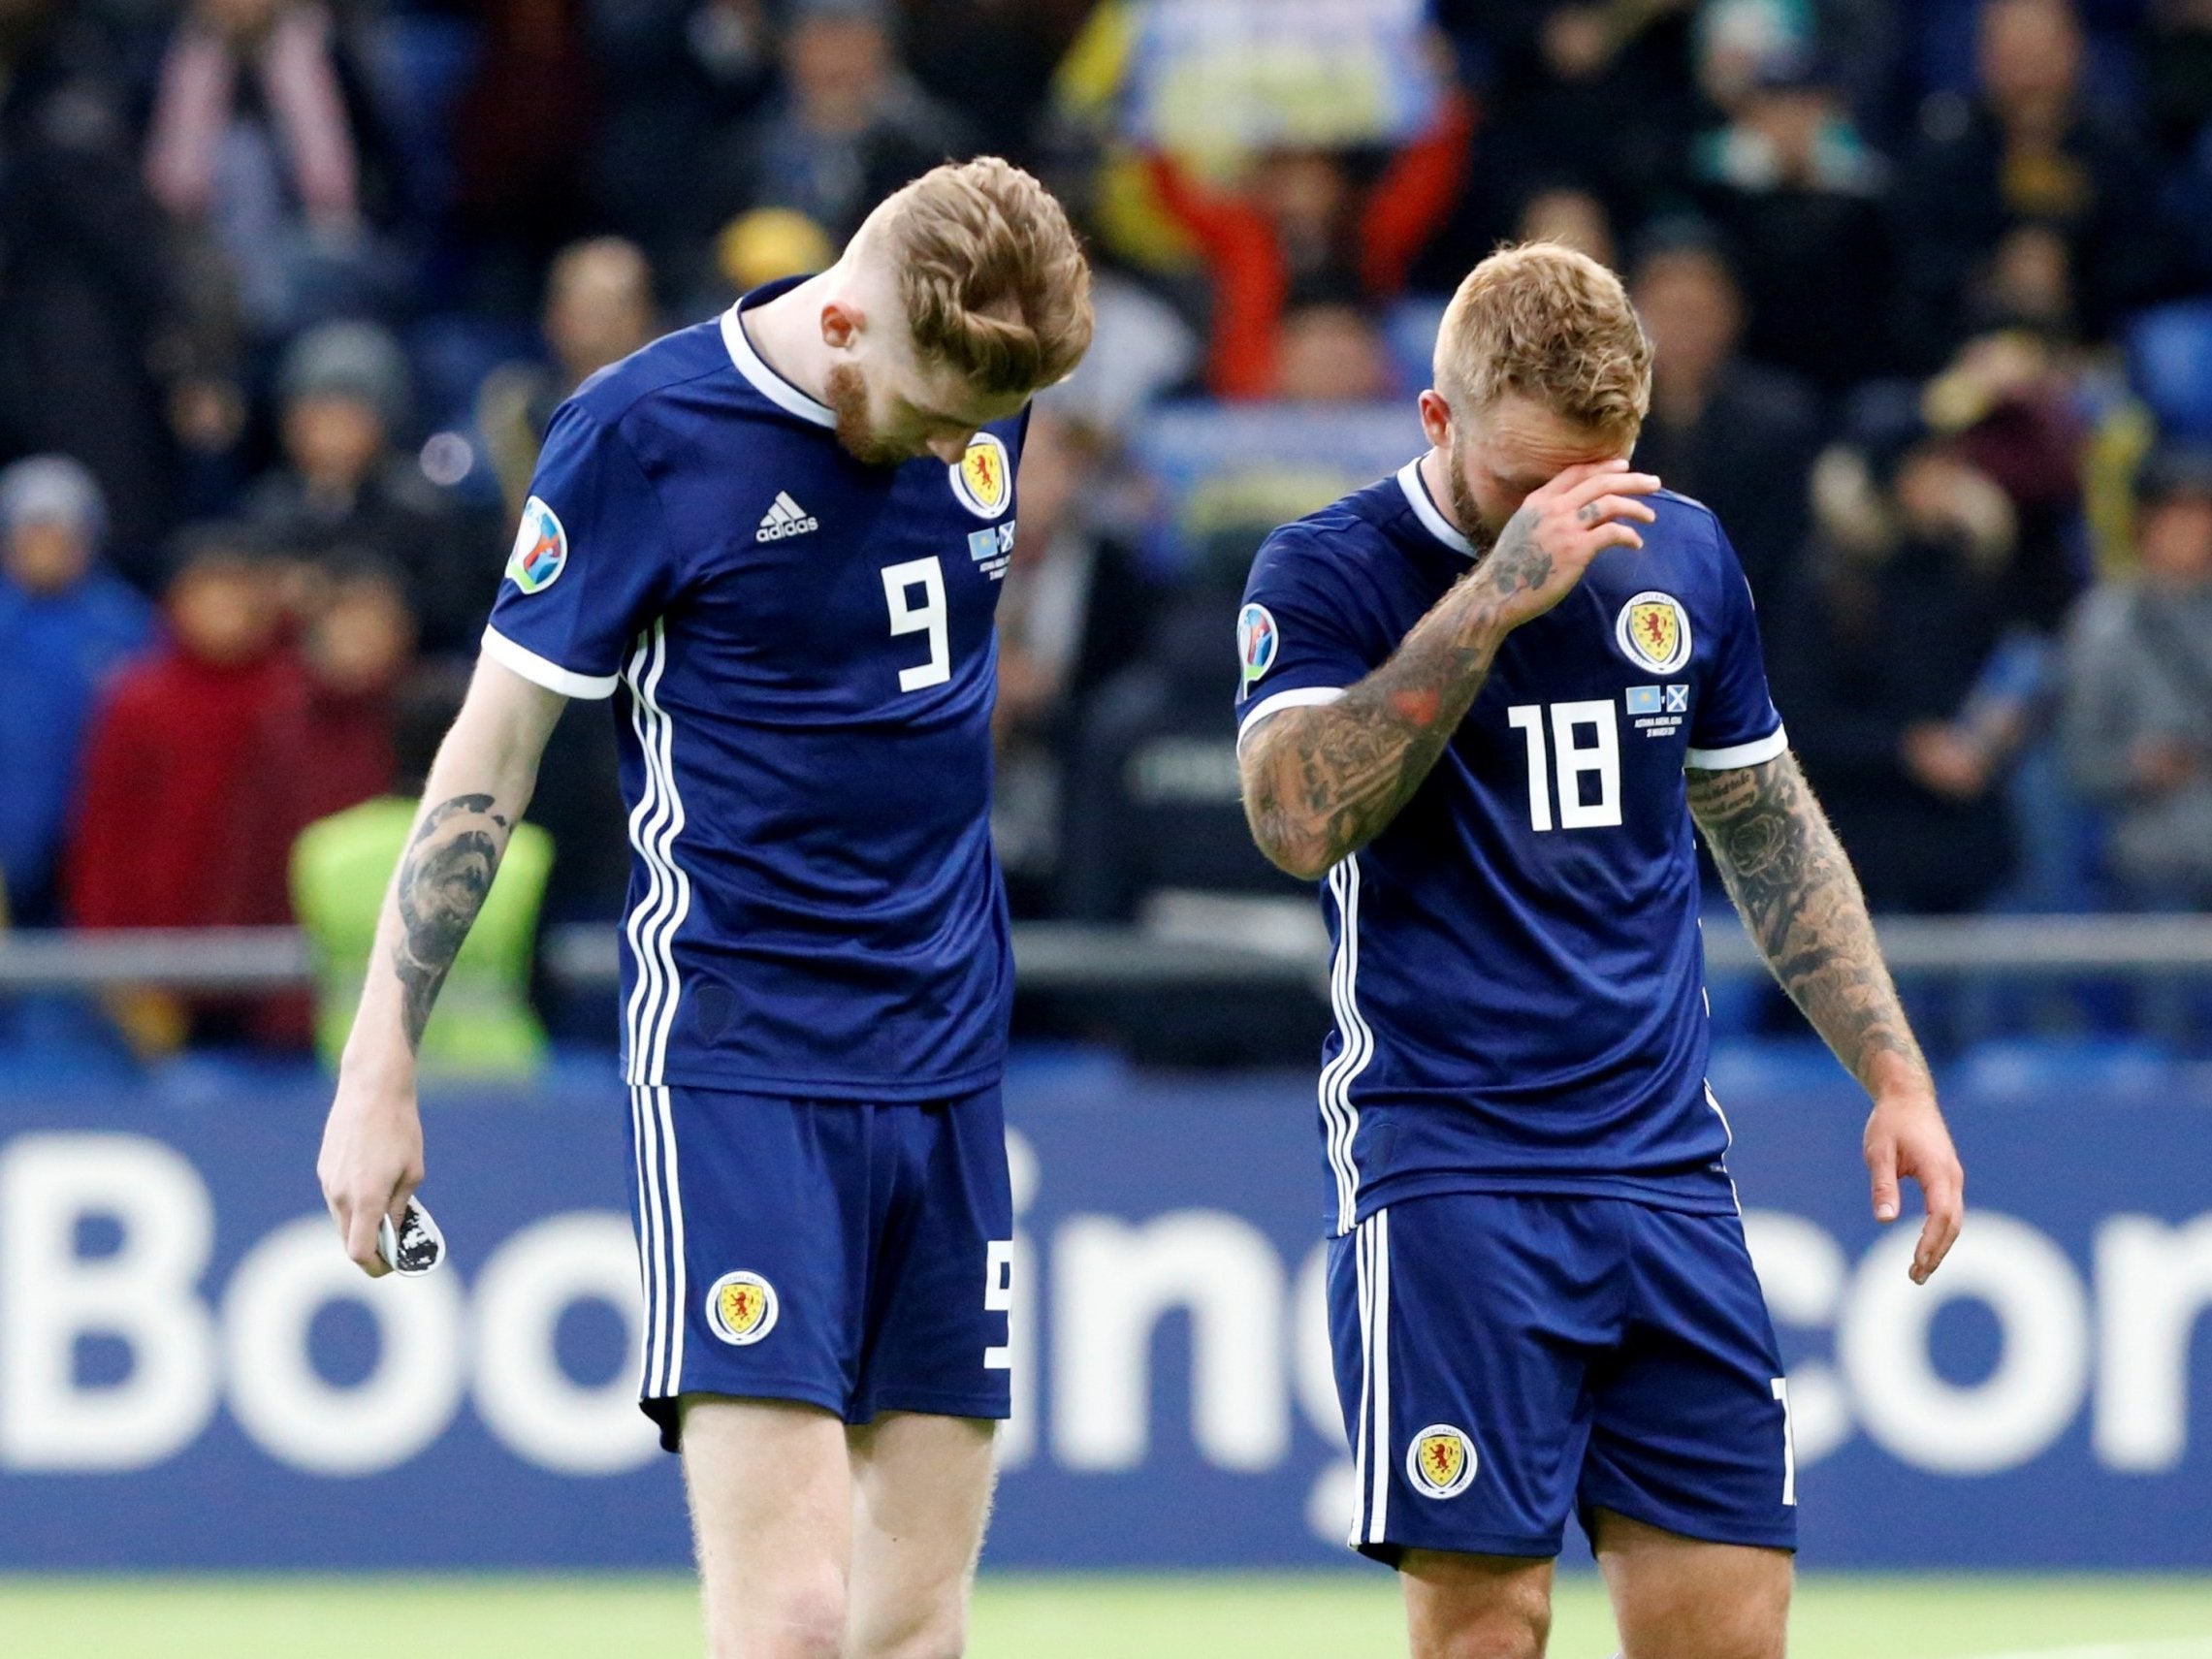 Scotland fell to a deeply disappointing result in Kazakhstan